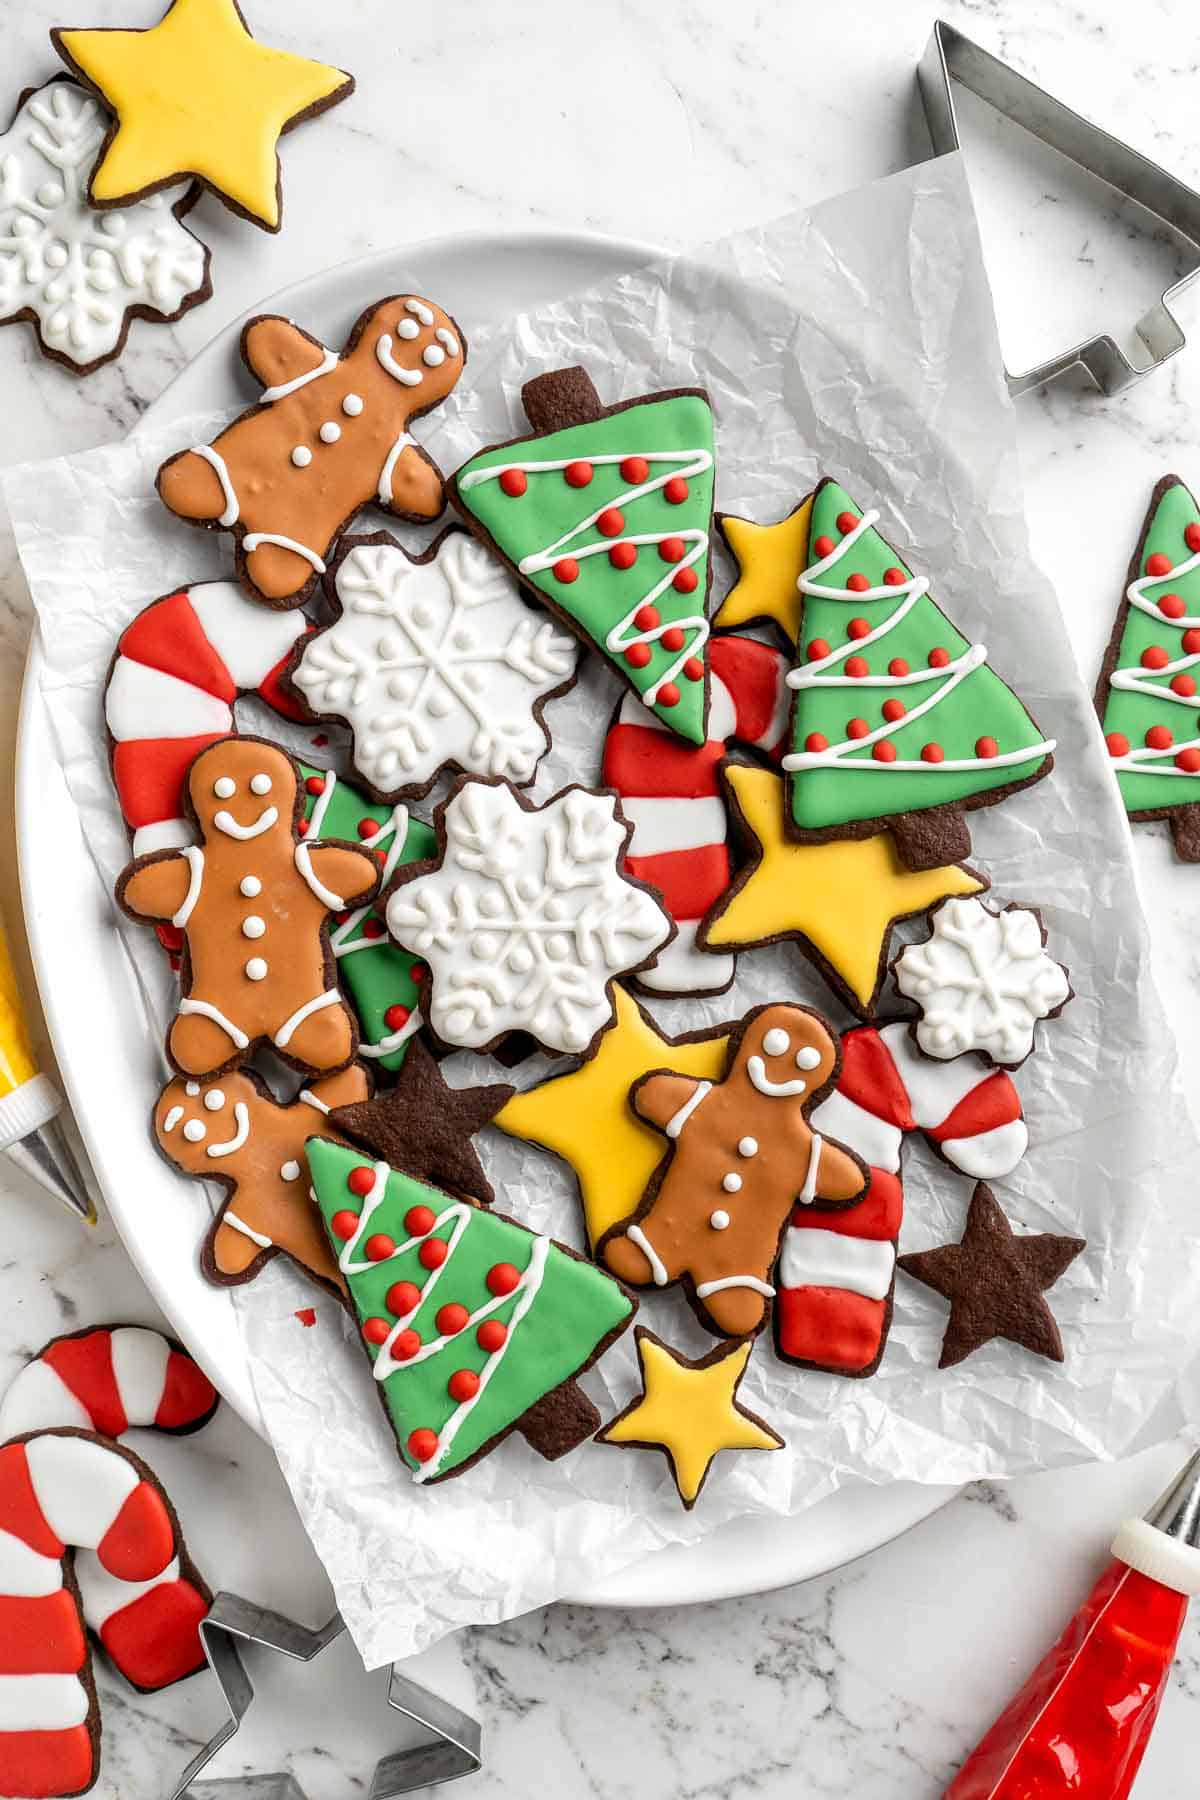 Chocolate Sugar Cookies are a fun twist on traditional sugar cookies. The warm brown color is the perfect background for creative piping and decorating. | aheadofthyme.com